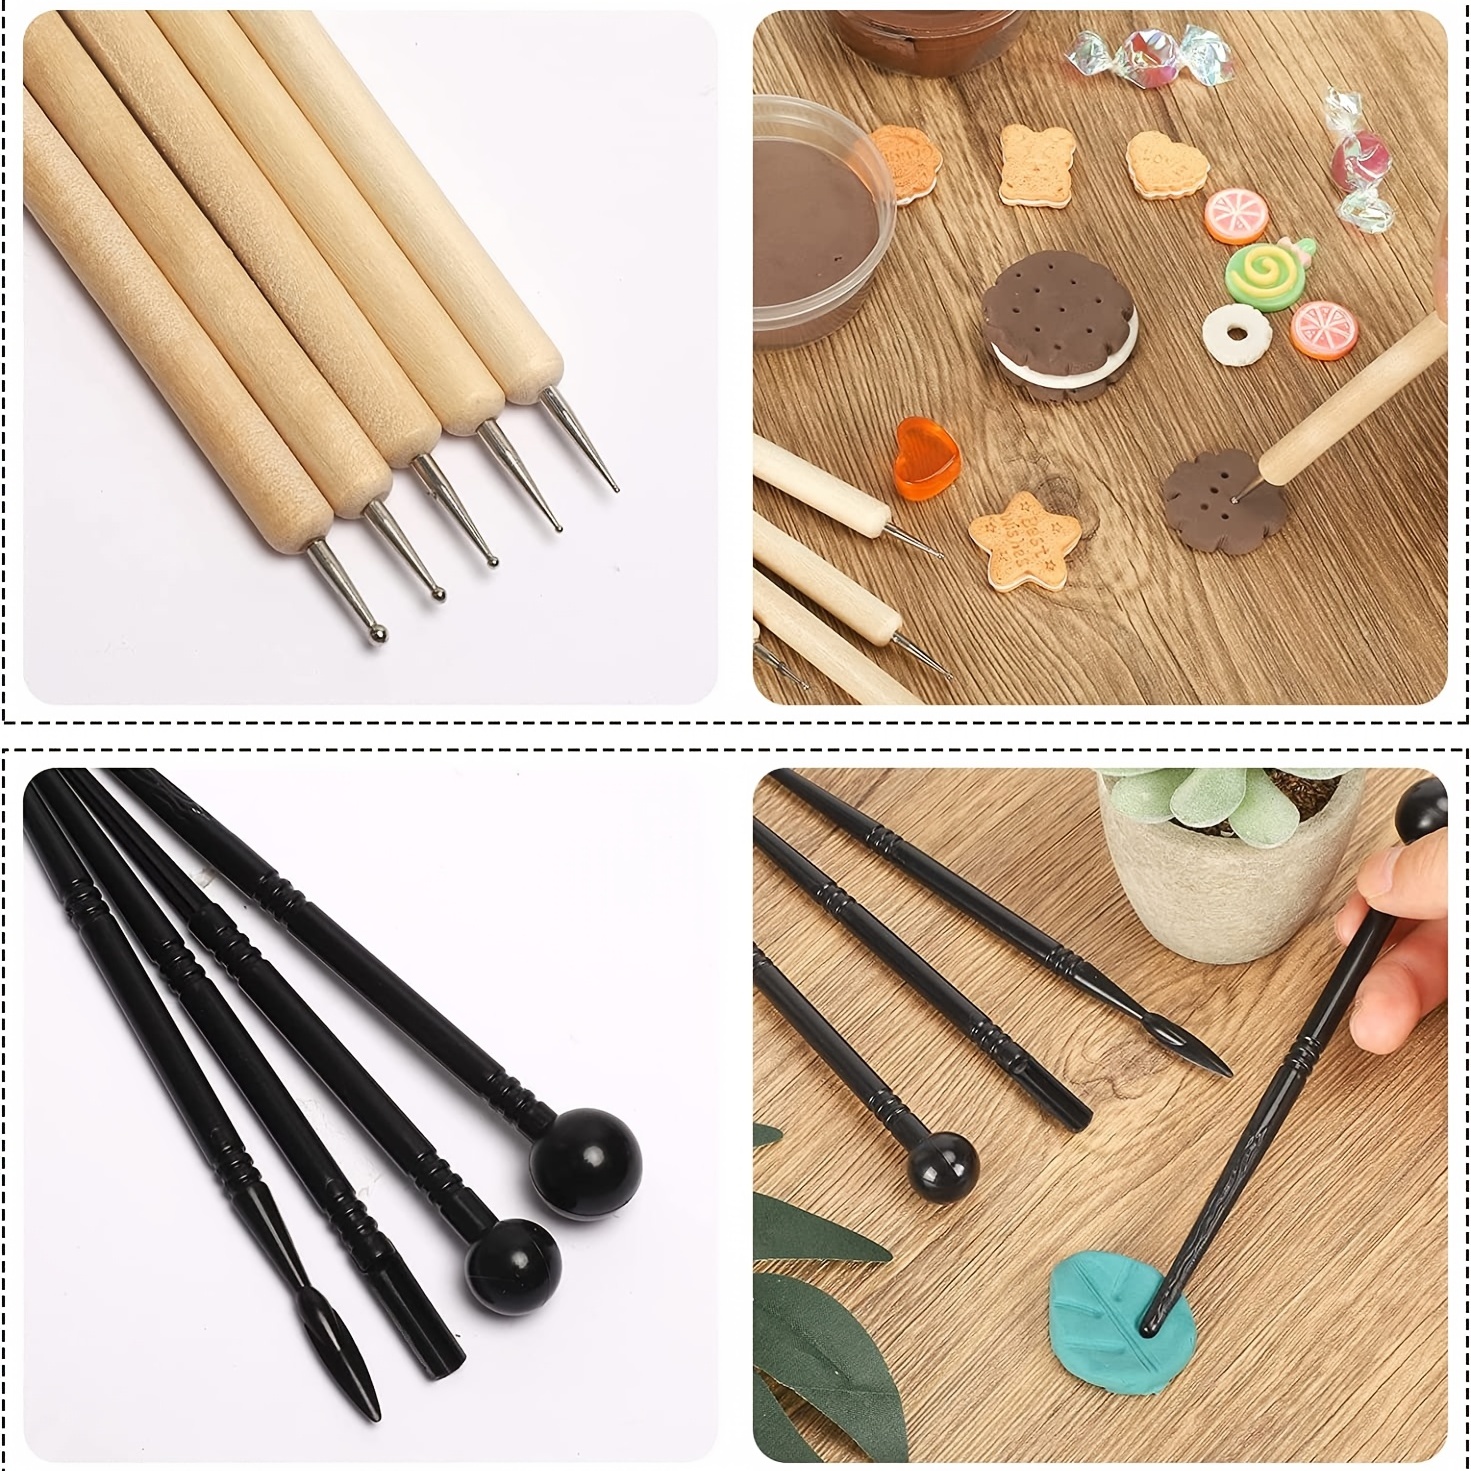 Cuteam 1 Set Pottery Tools Compound with 23 Pcs Pottery Tools Air-Dry Clay  Sculpting Tool Set All-Purpose Carving Shaping Cutting Scraping Brushing